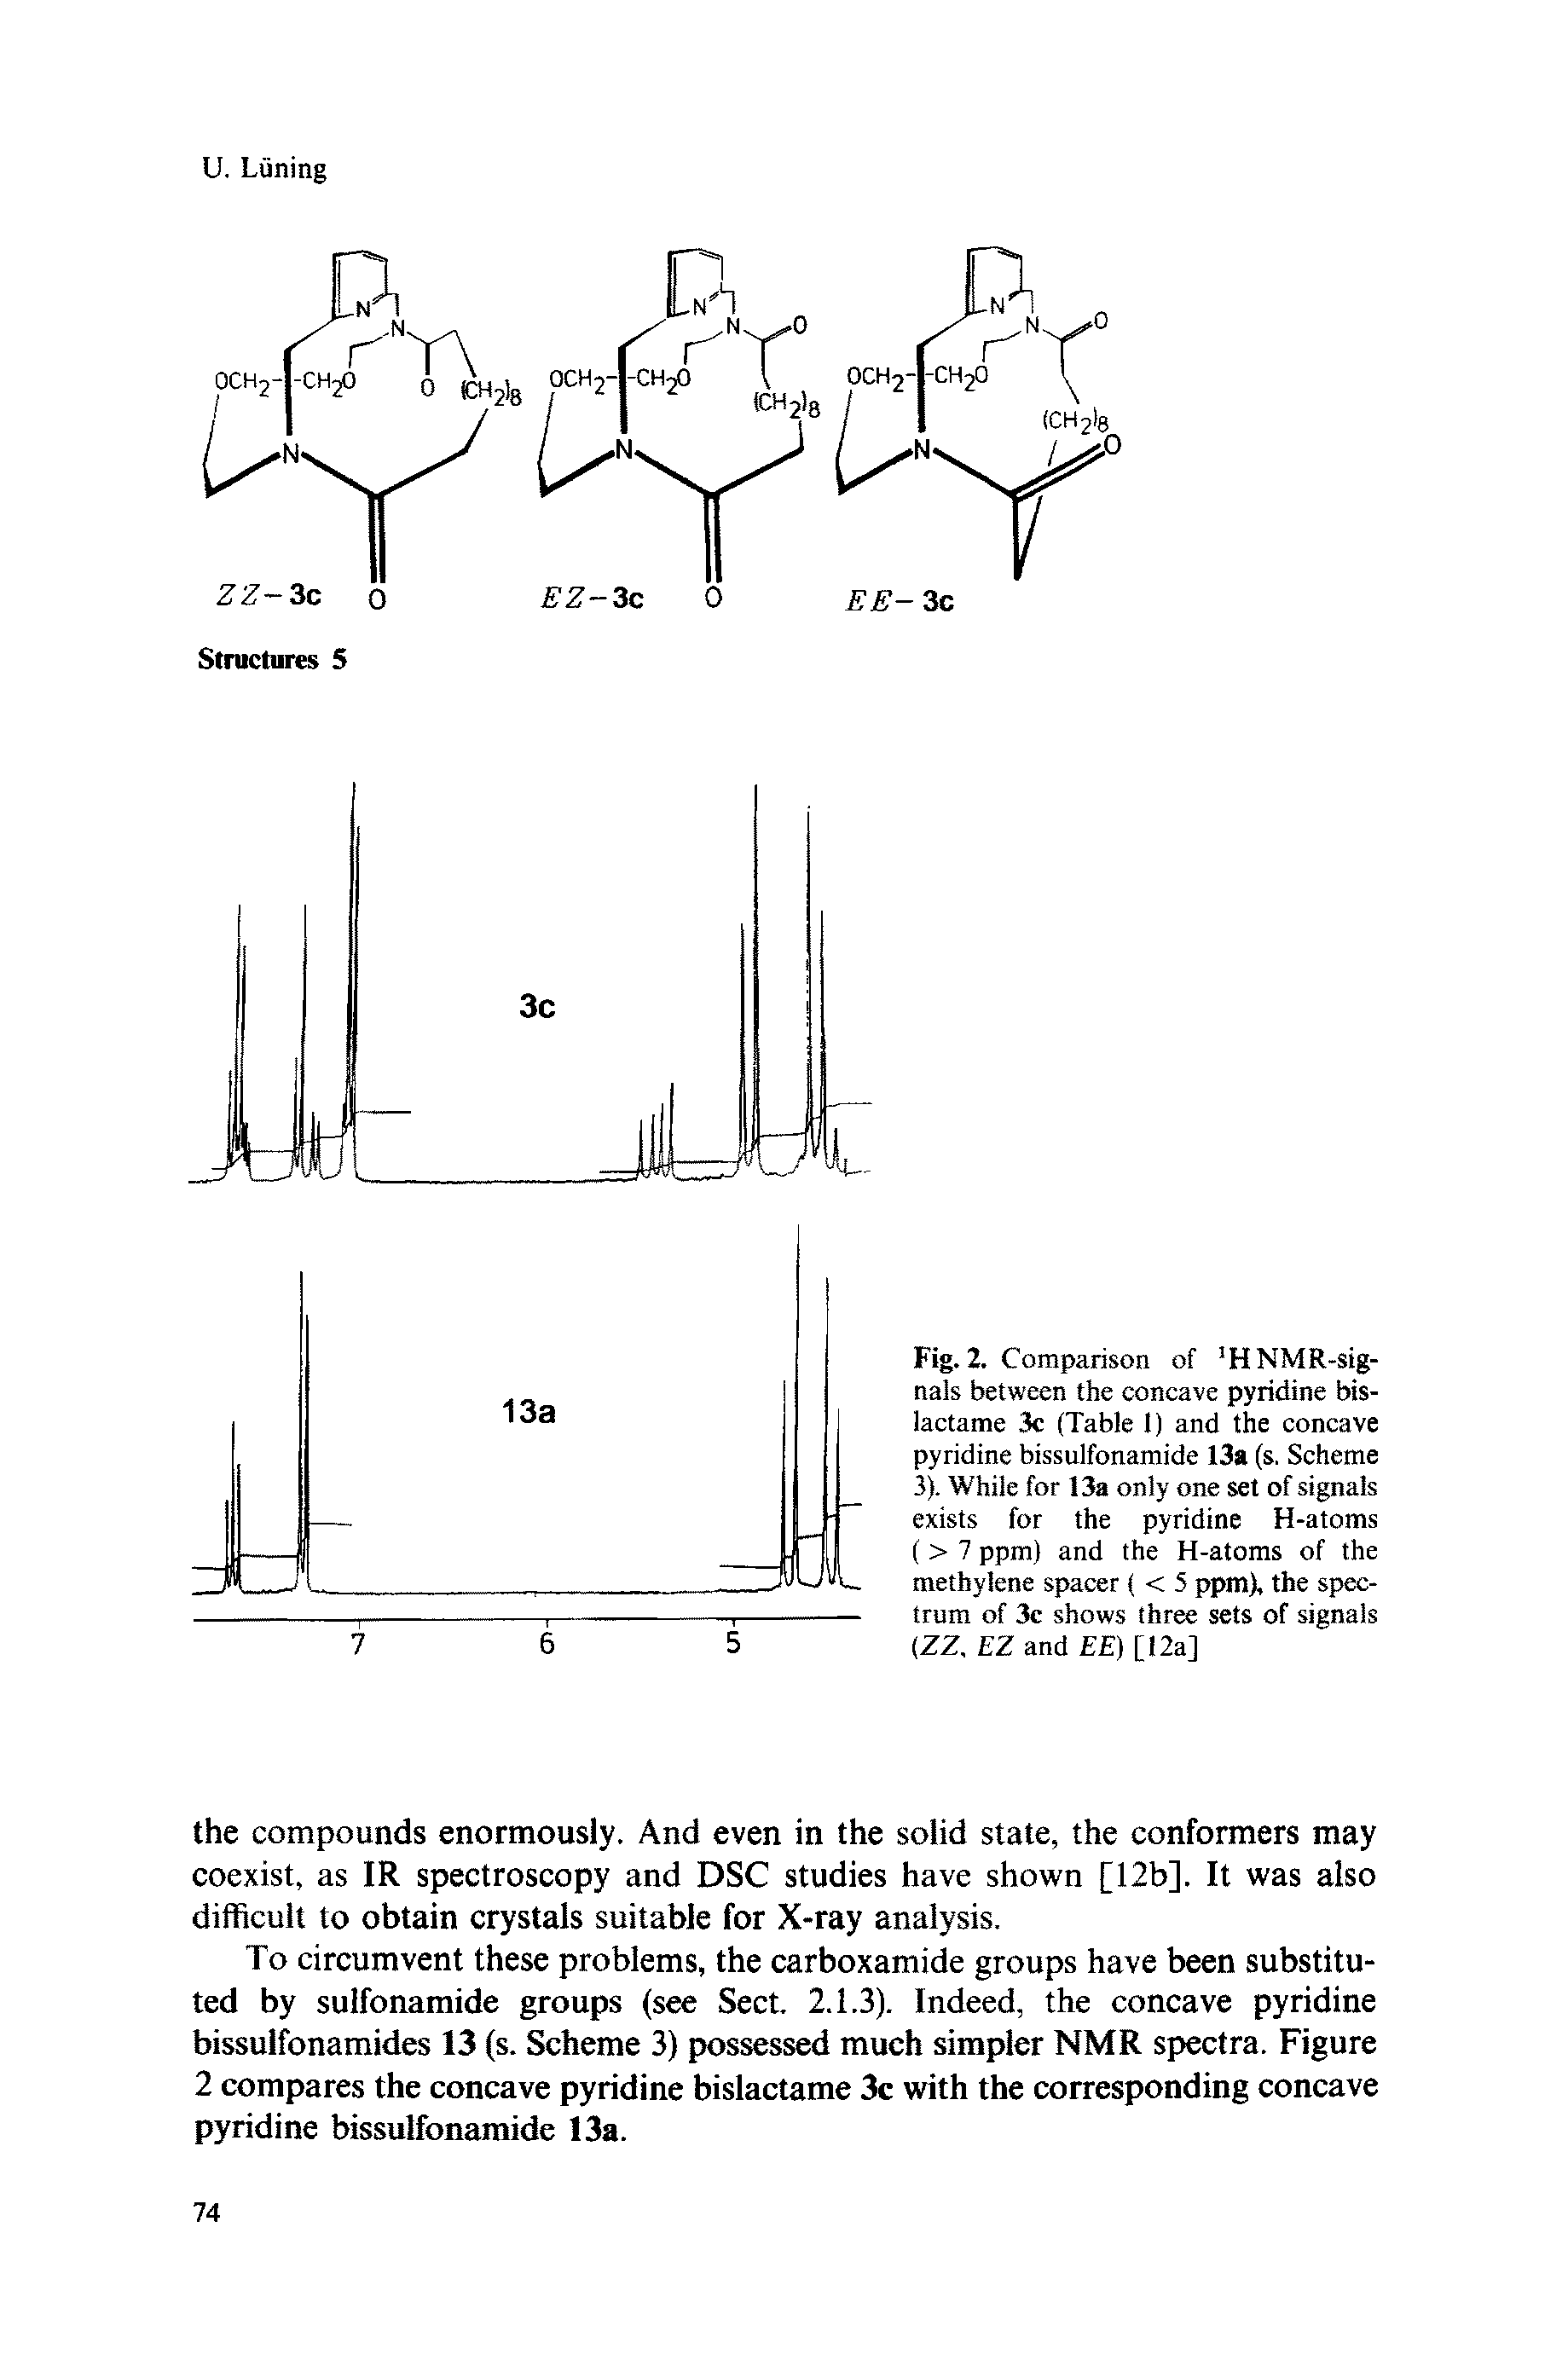 Fig. 2. Comparison of HNMR-sig-nals between the concave pyridine bis-lactame 3c (Table 1) and the concave pyridine bissulfonamide 13a (s. Scheme 3). While for 13a only one set of signals exists for the pyridine H-atoms ( > 7 ppm) and the H-atoms of the methylene spacer ( < 5 ppm), the spectrum of 3e shows three sets of signals (ZZ, EZ and EE) [12a]...